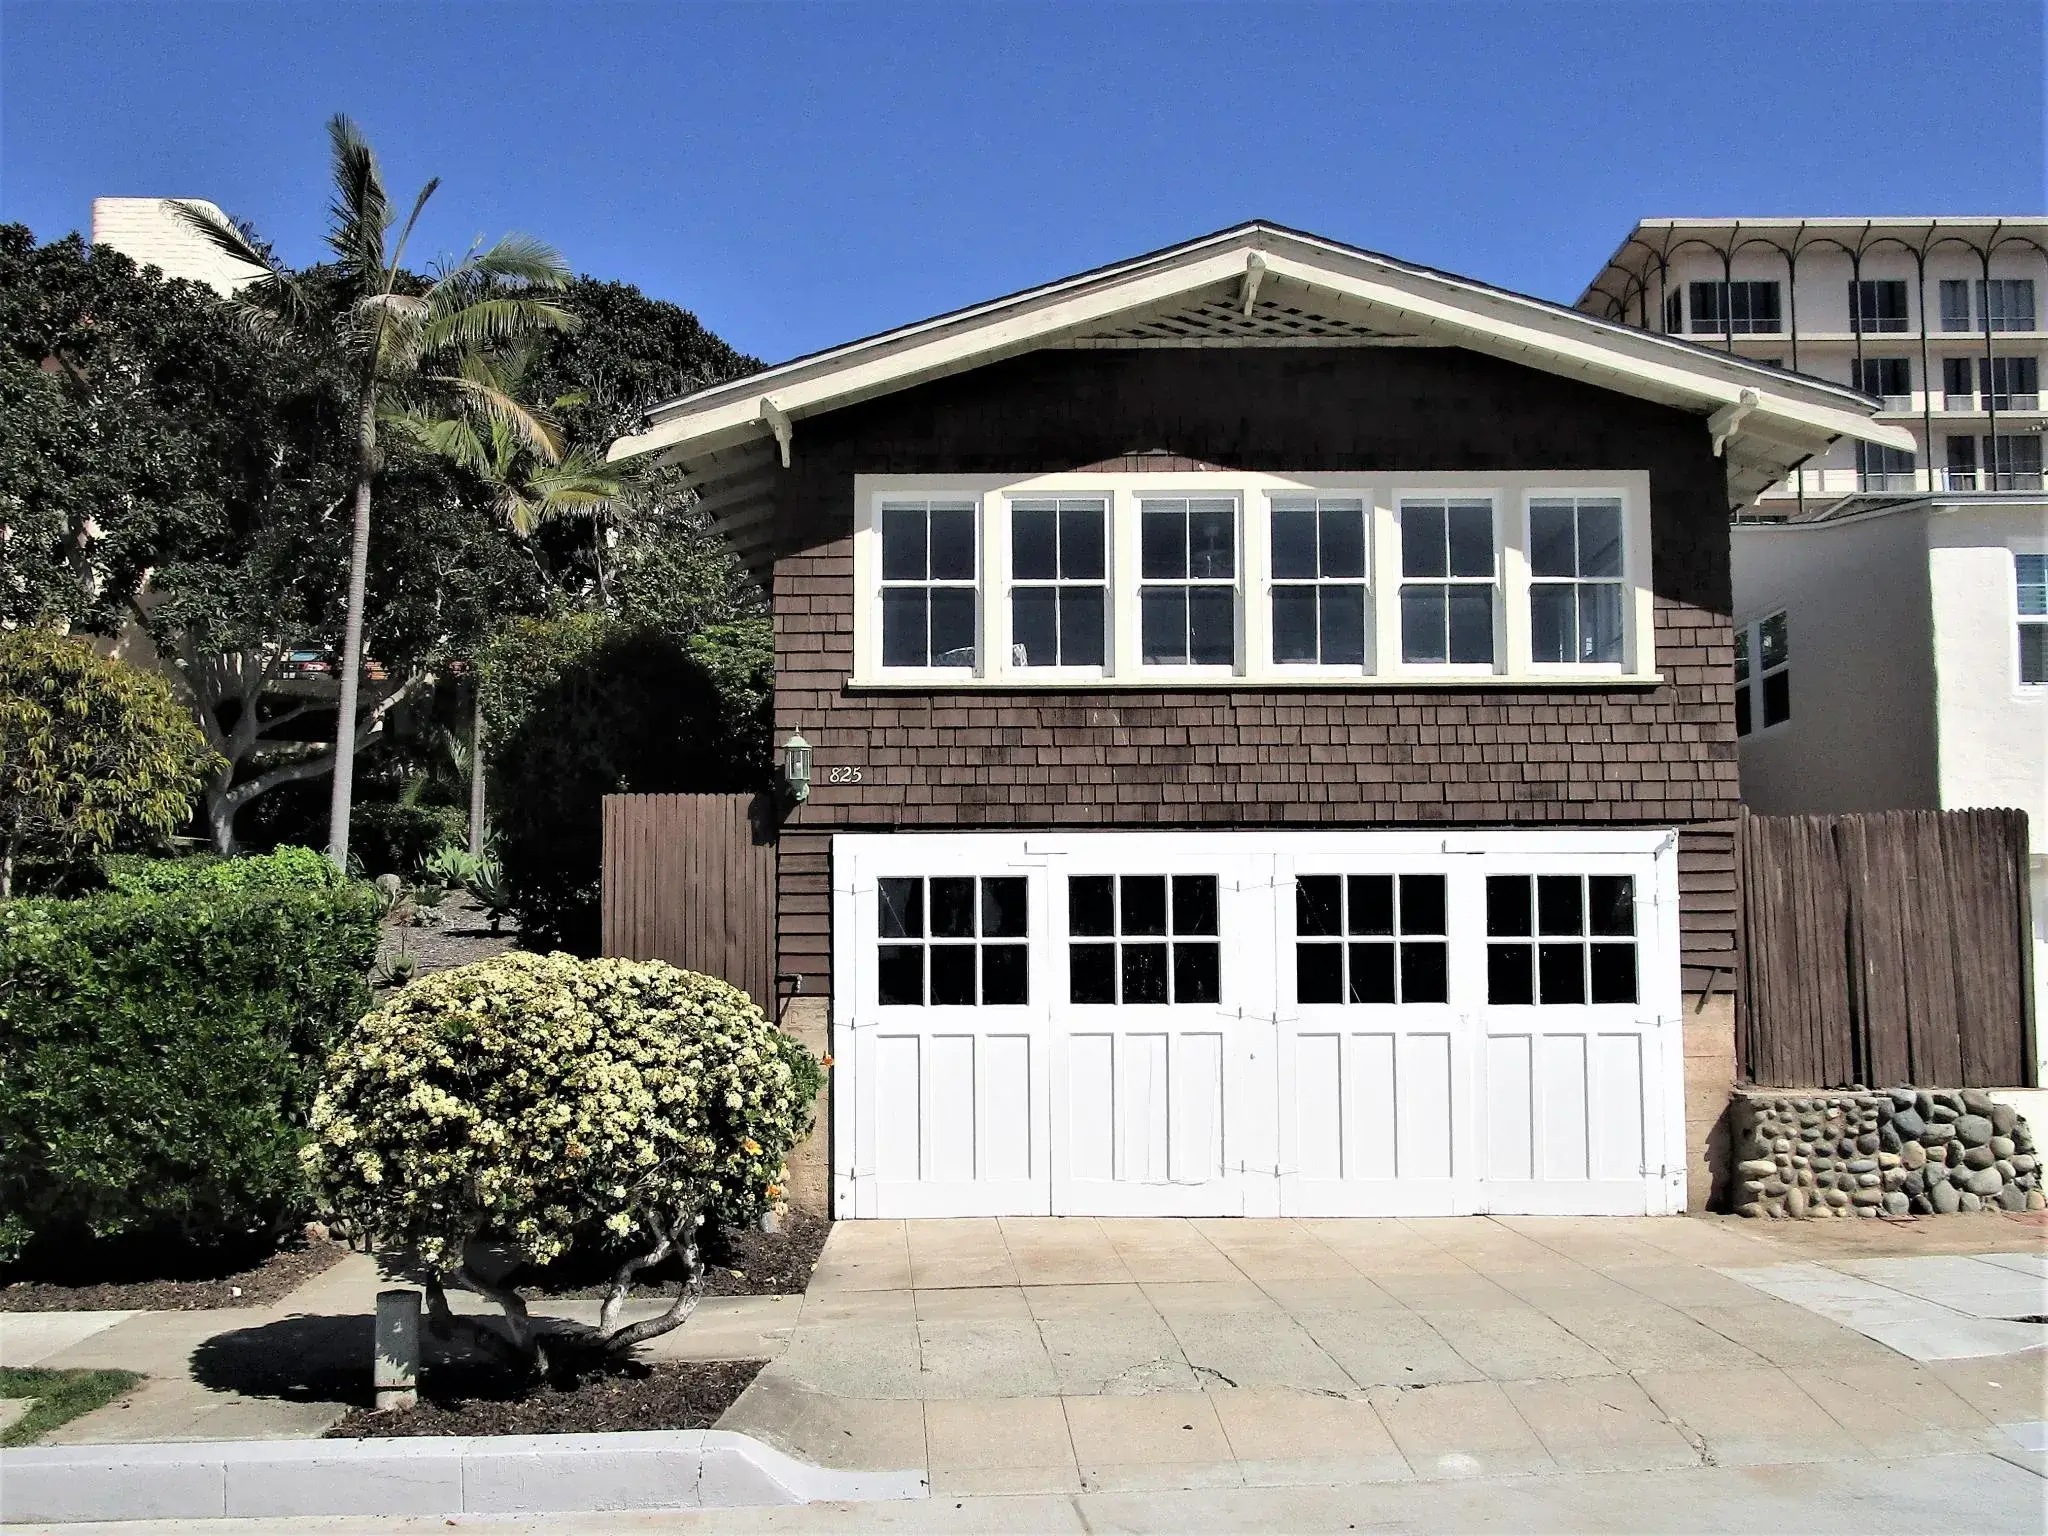 Our House in La Jolla